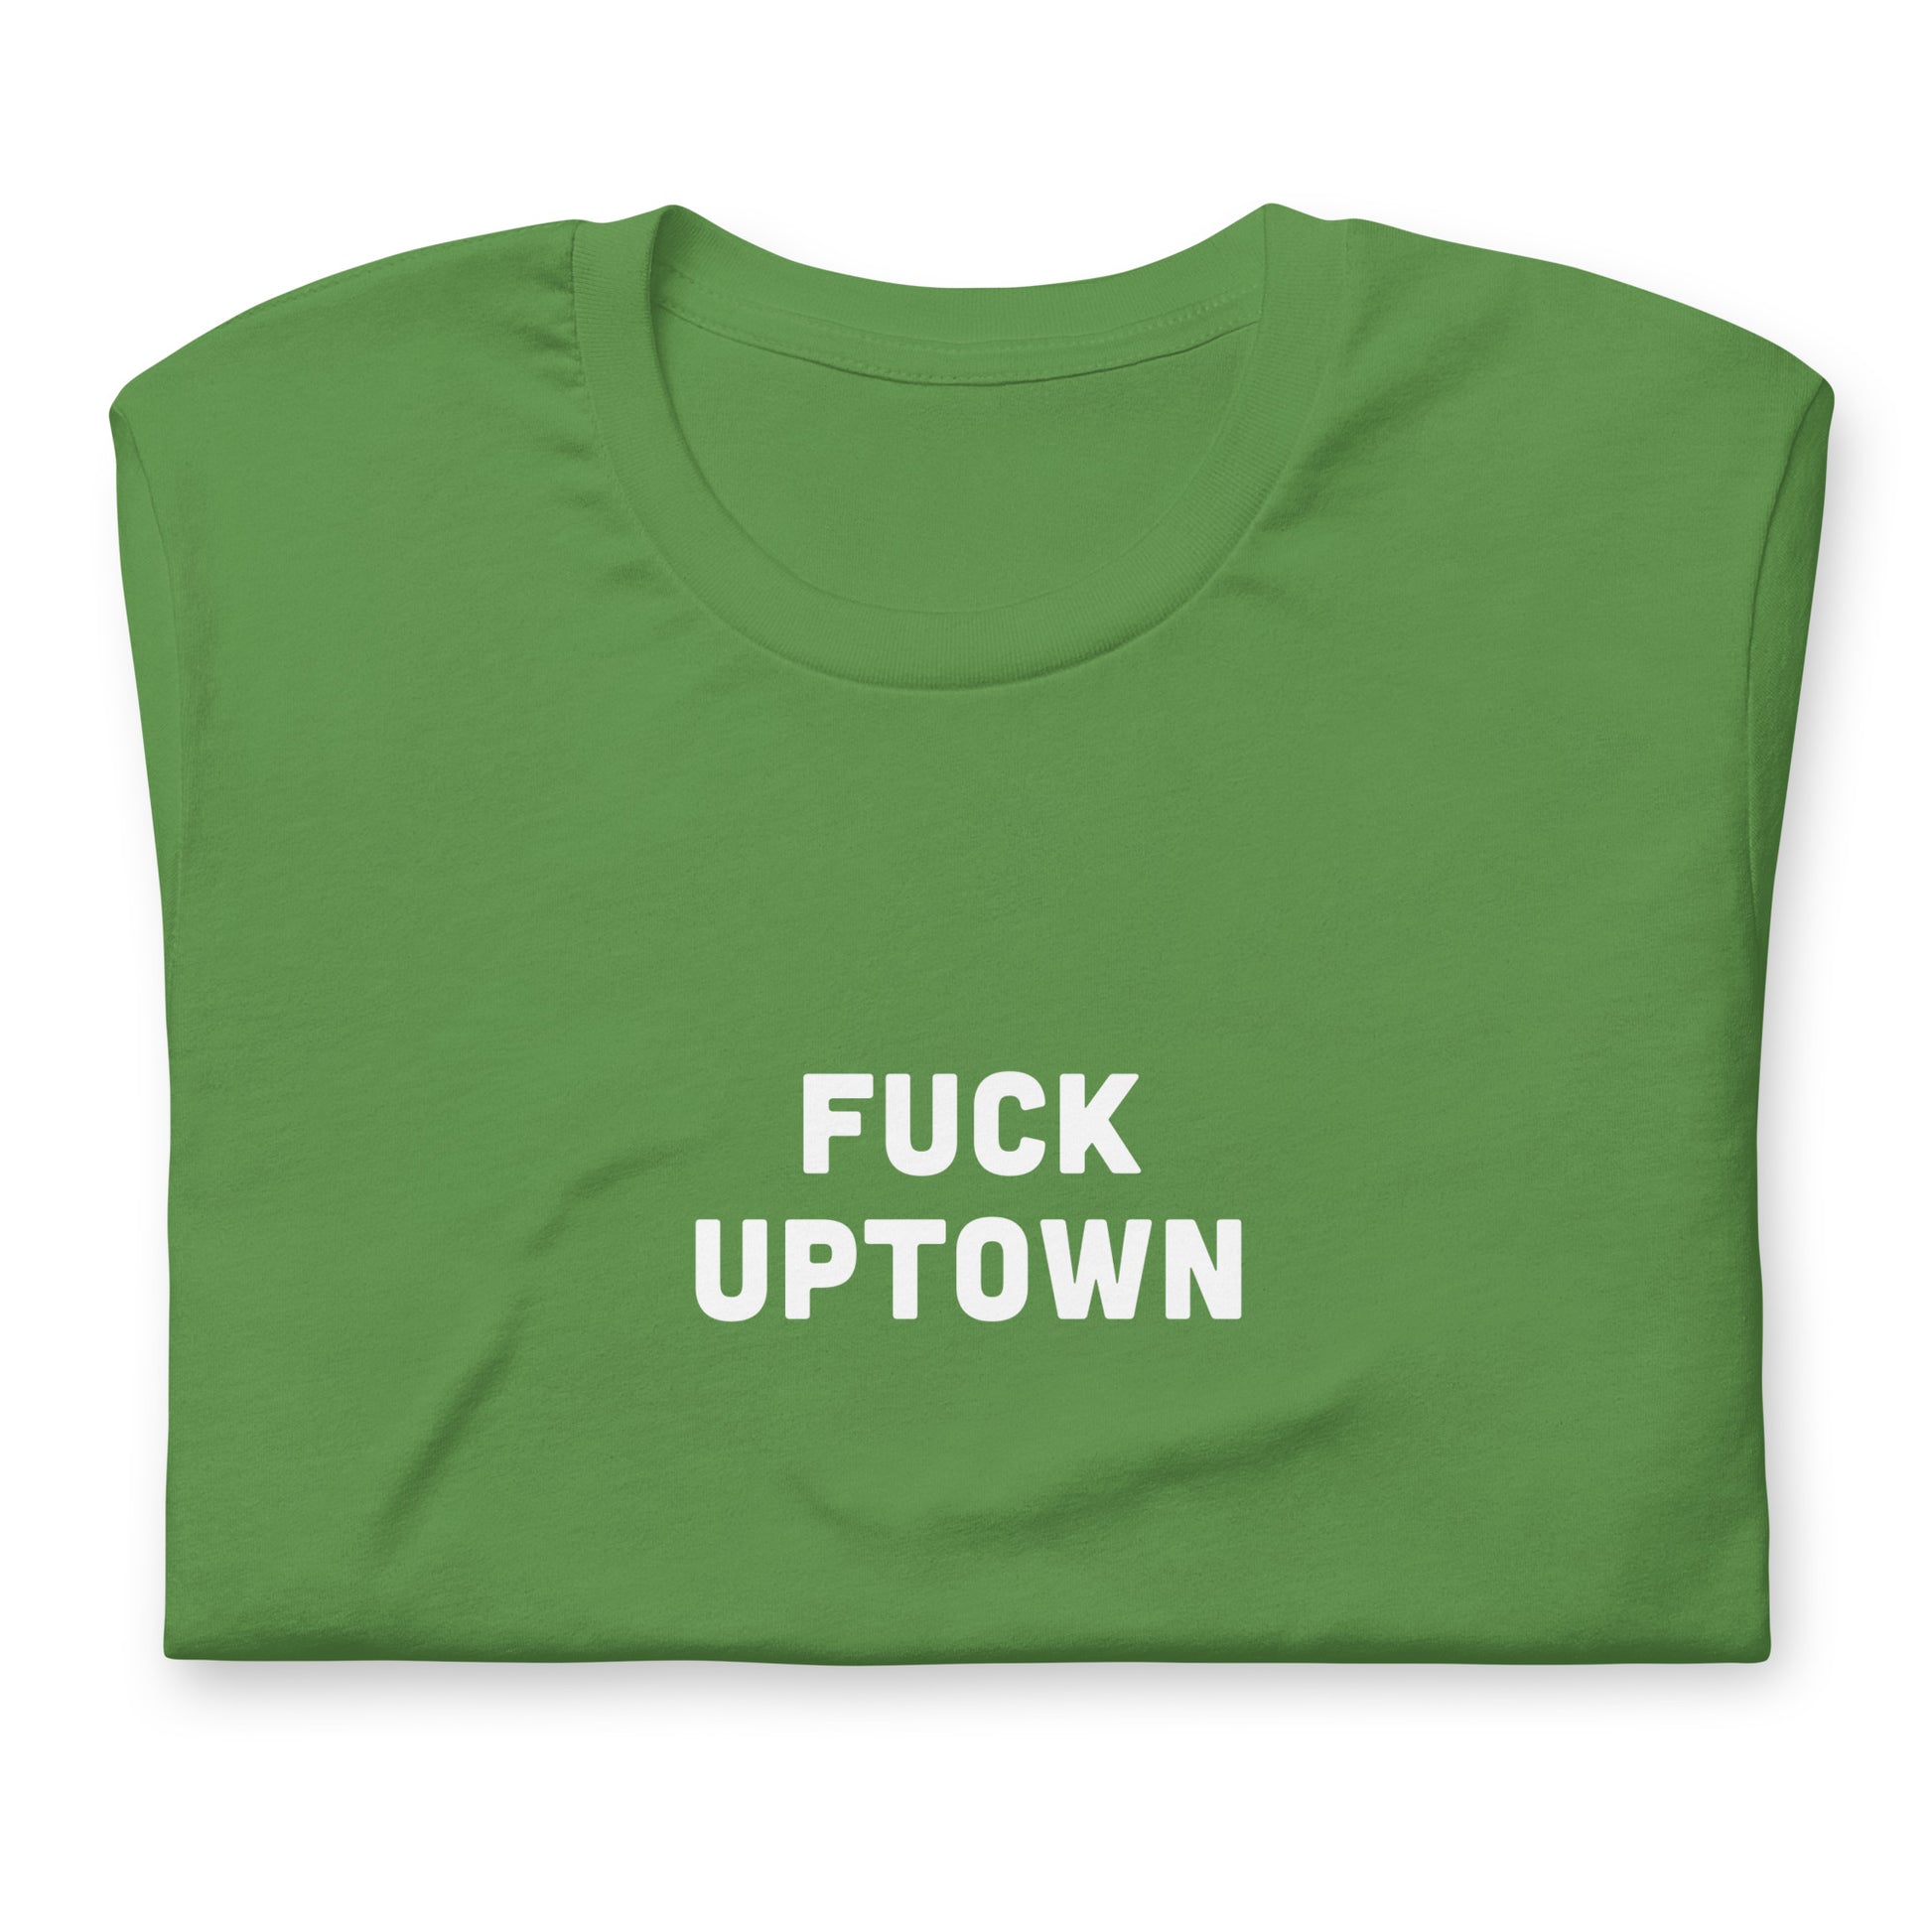 Fuck Uptown T-Shirt Size 2XL Color Navy